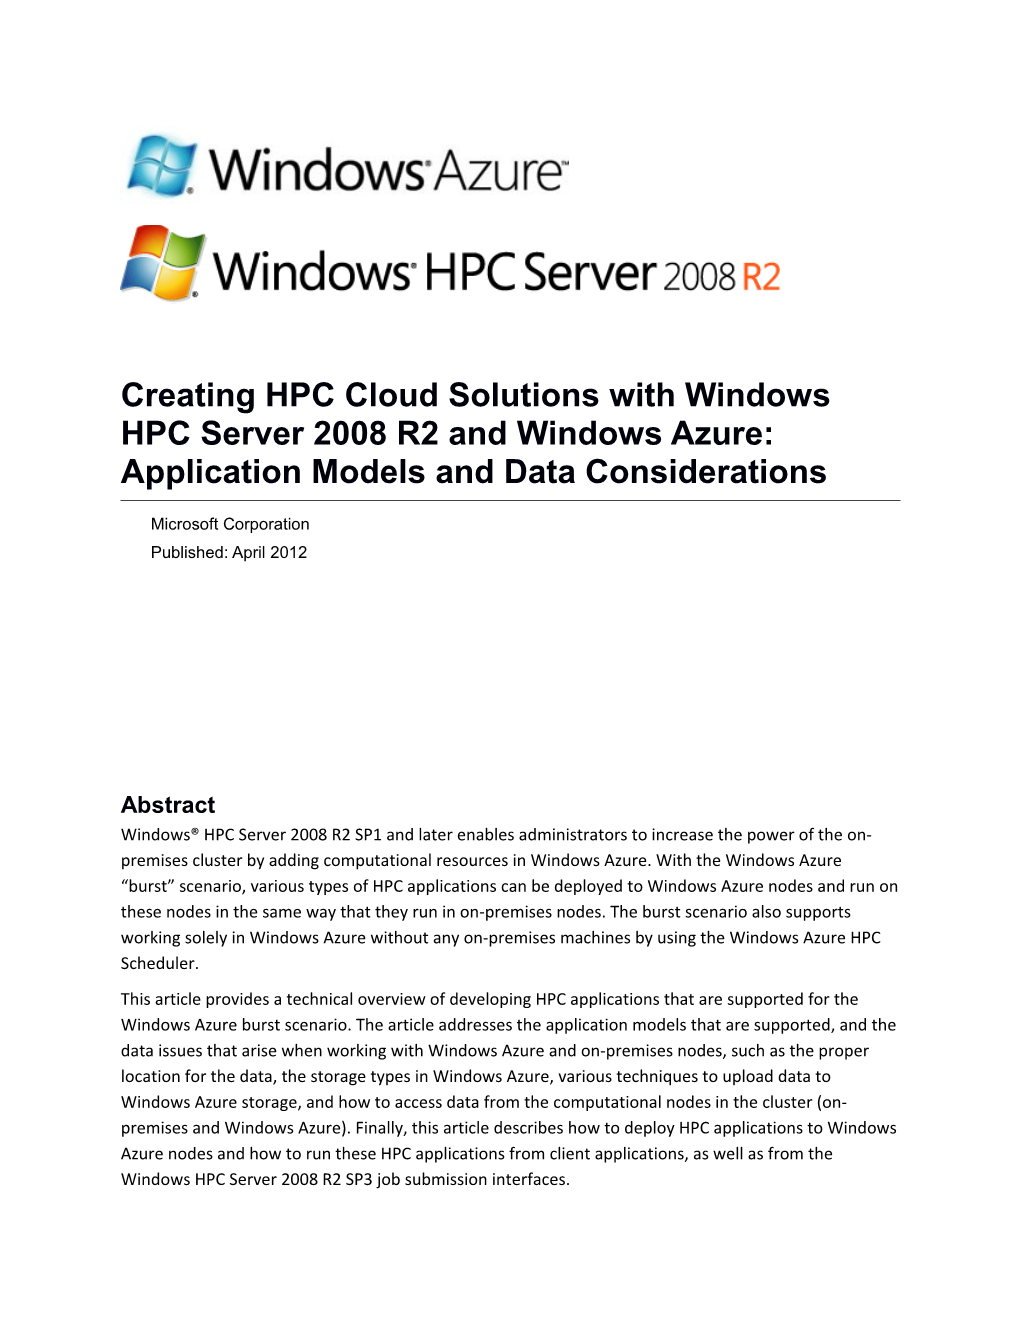 Creating HPC Cloud Solutions with Windows HPC Server 2008 R2 and Windows Azure: Application